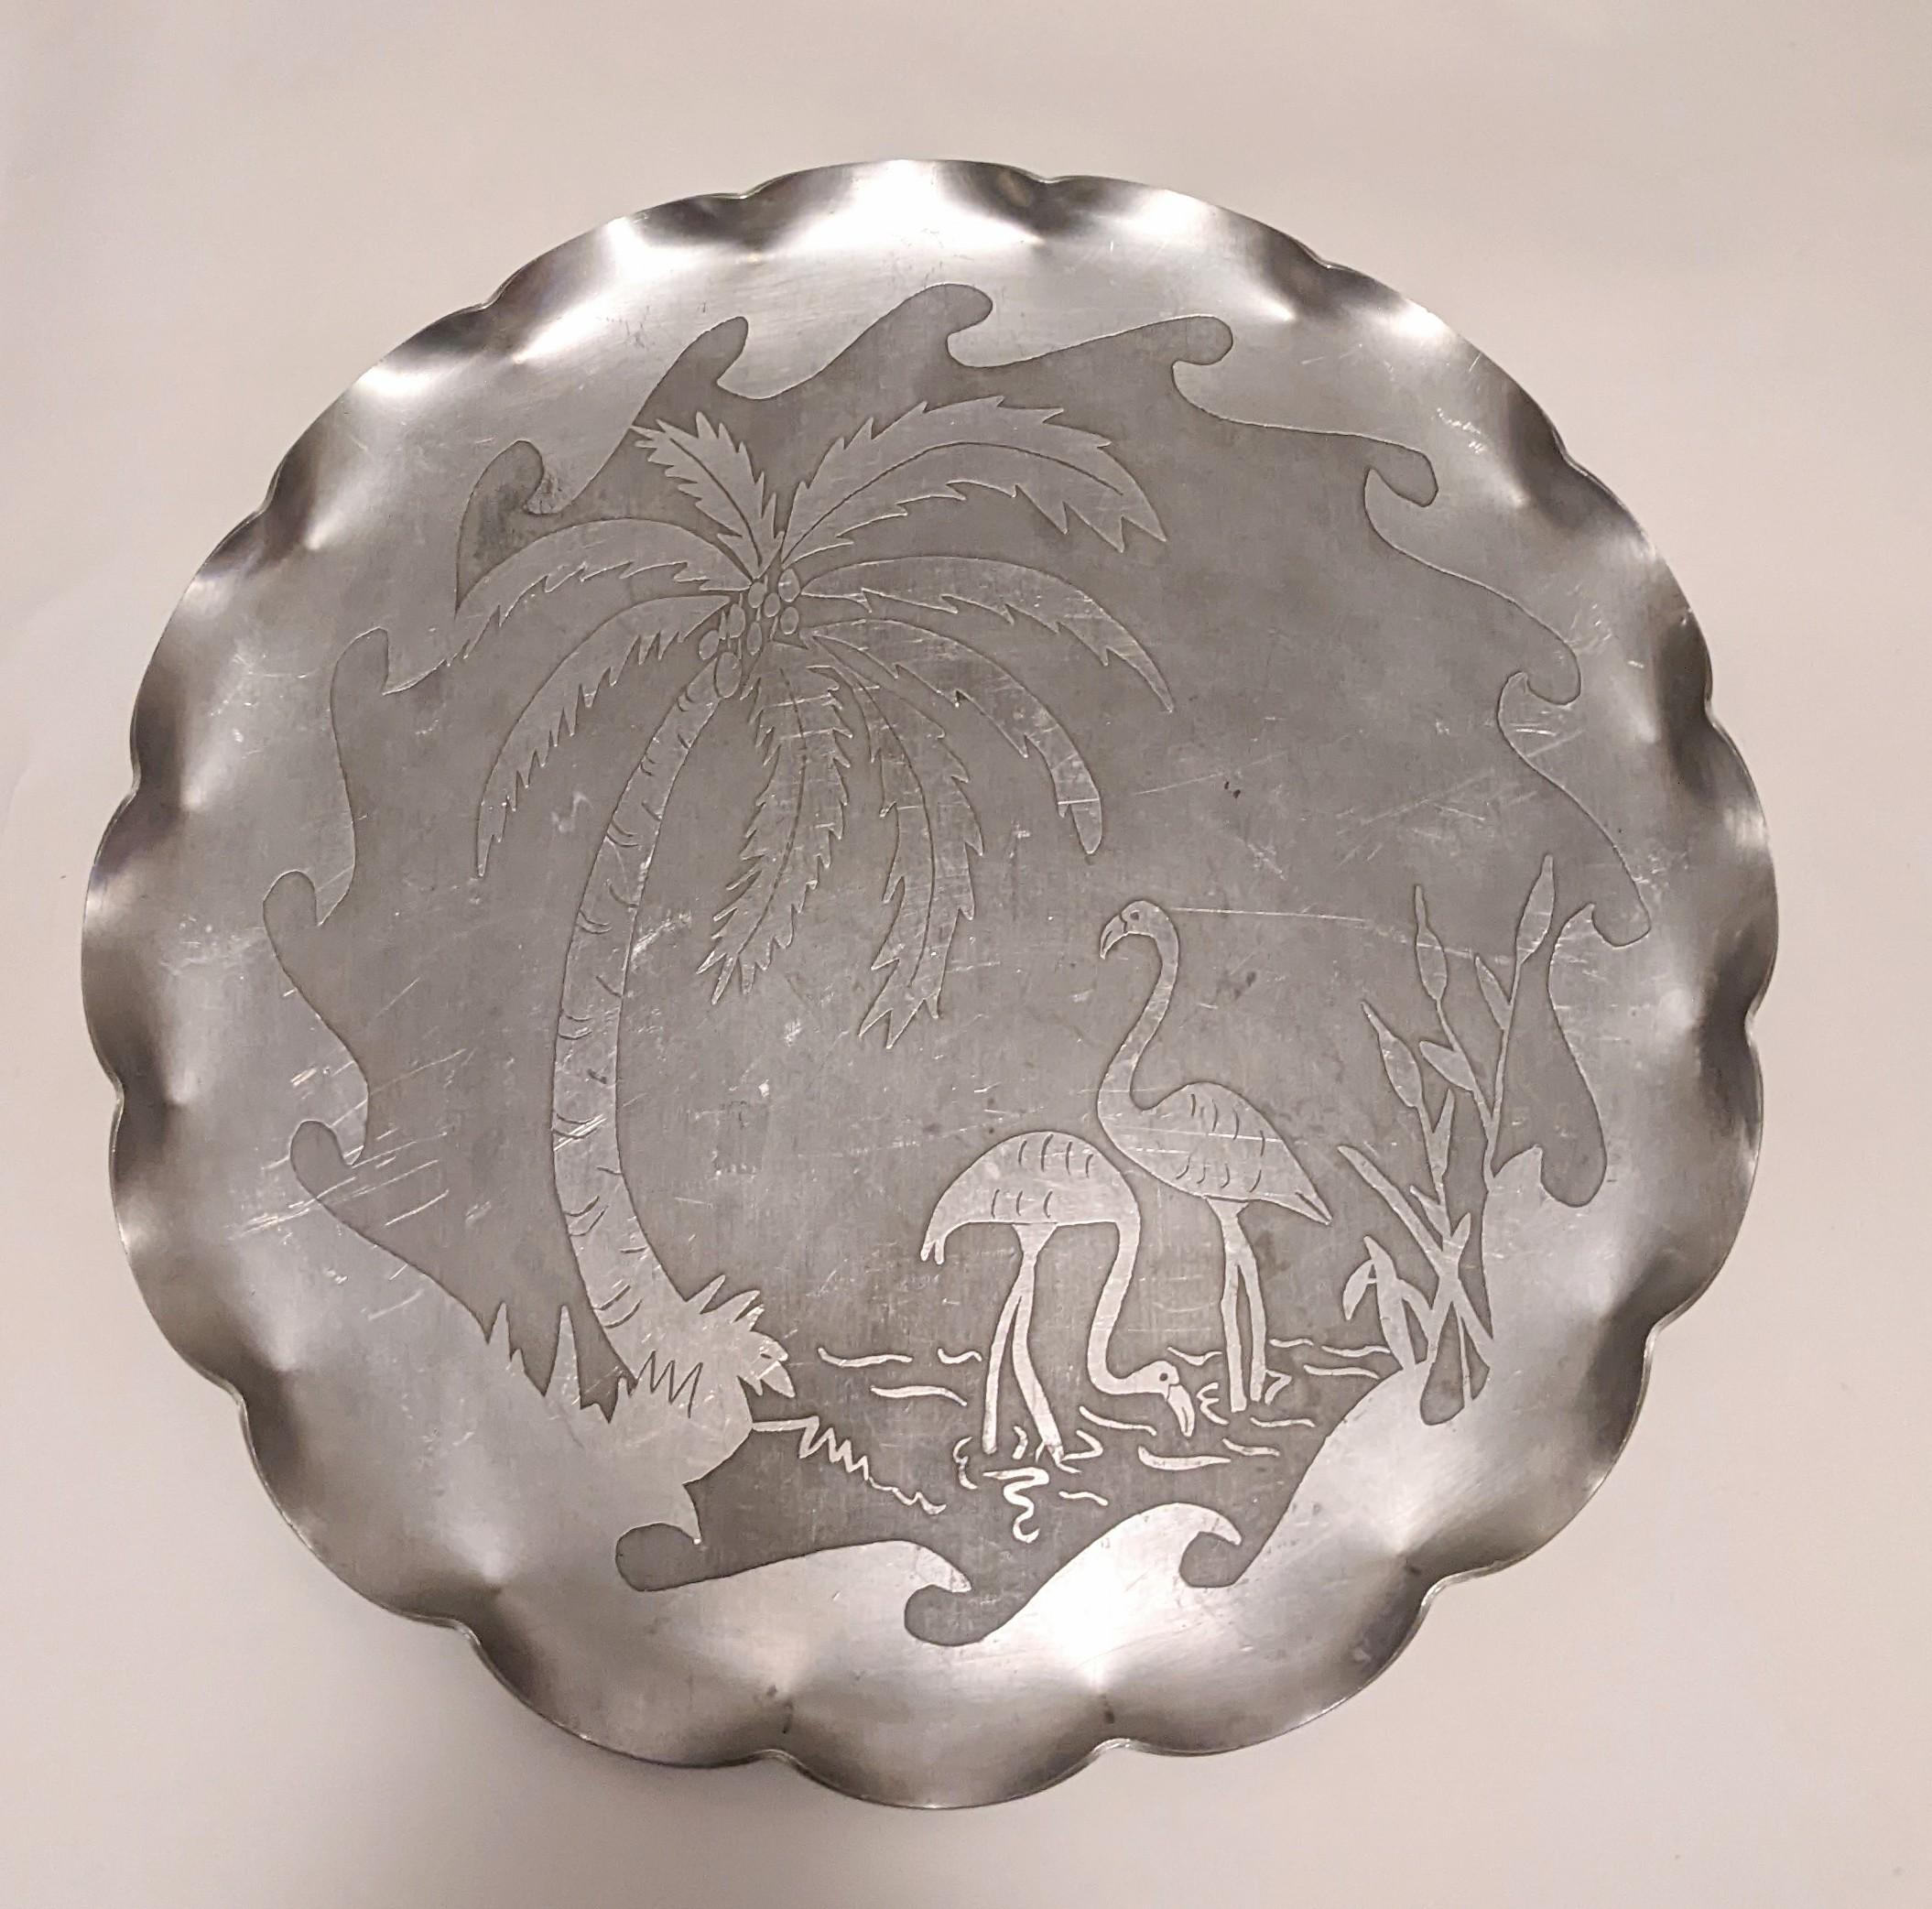 Unusual hand made folk art tray from the 1950's in aluminum with etched and incised tropical theme of flamingos in palm trees. Great serving and conversation piece signed by woman artist 1950. Edges are gently scalloped for interest.